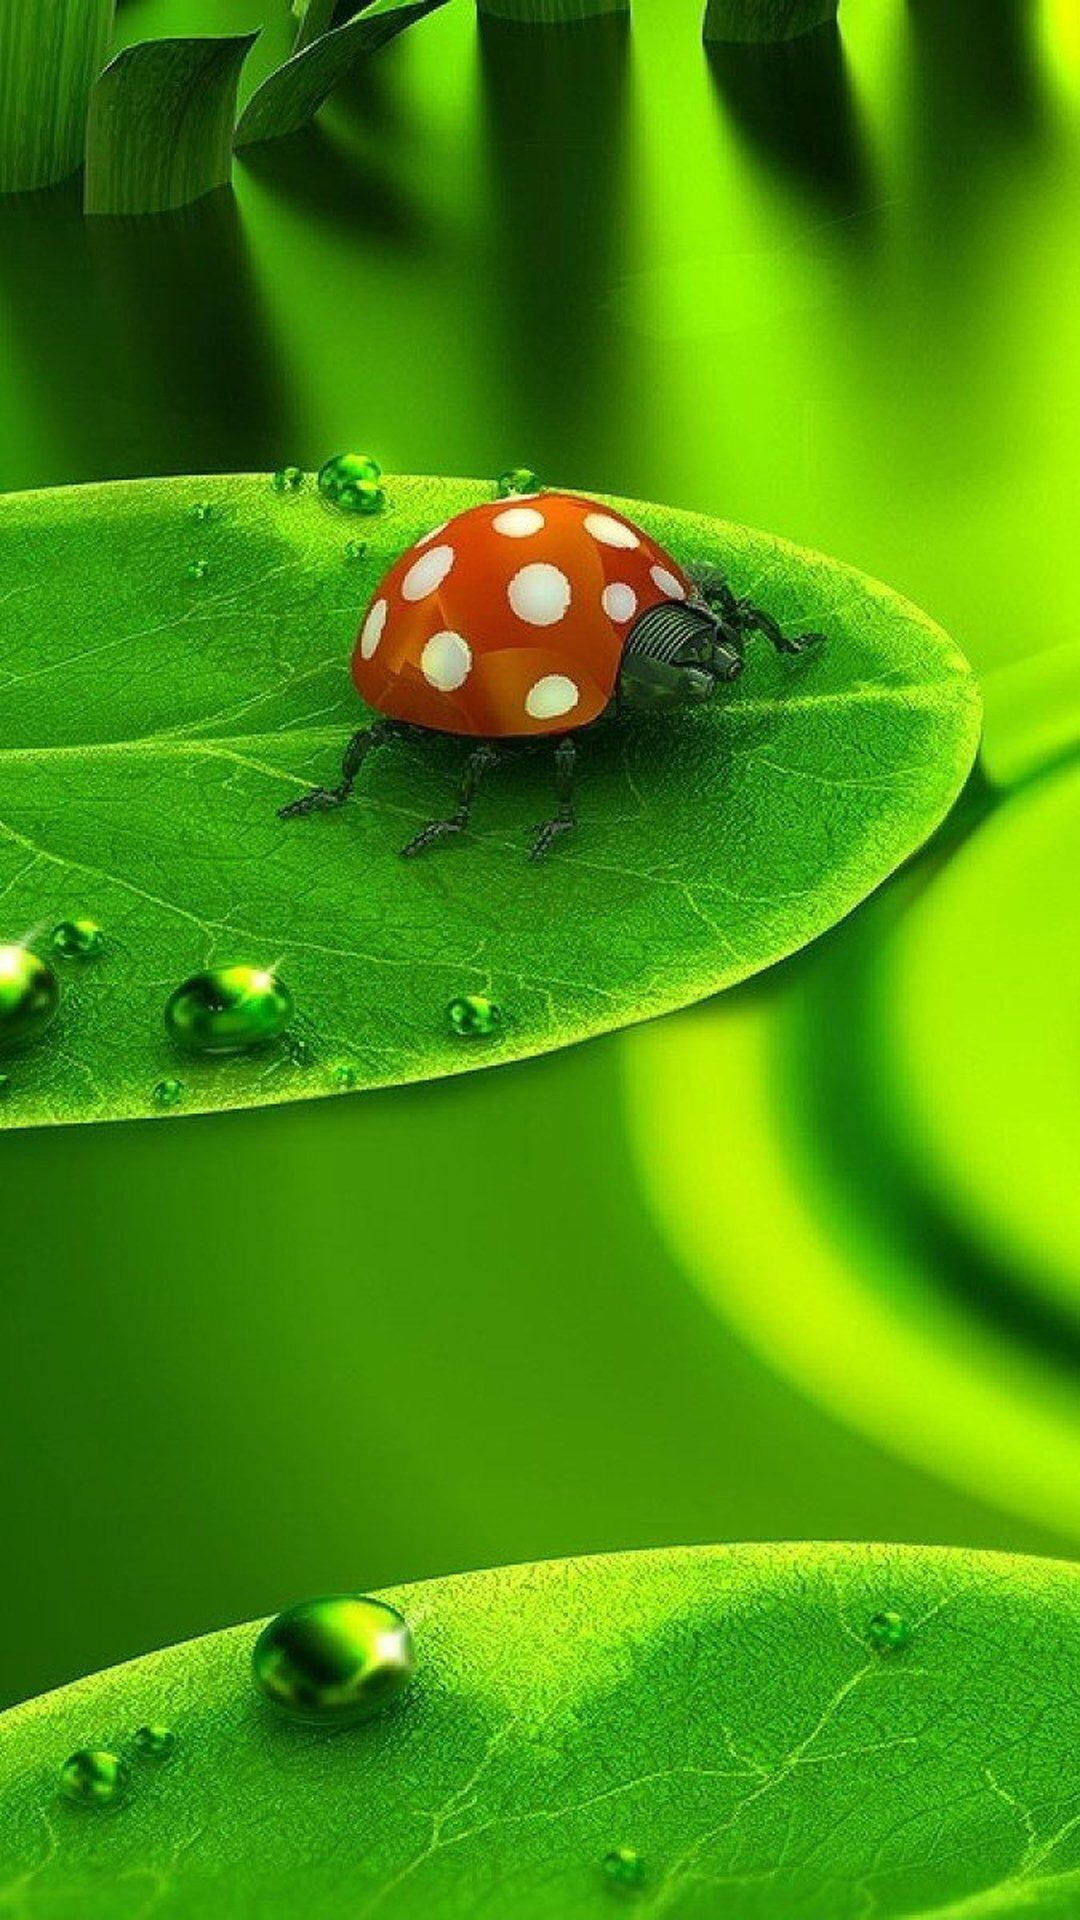 Ladybug Beetle With White Spots Wallpaper